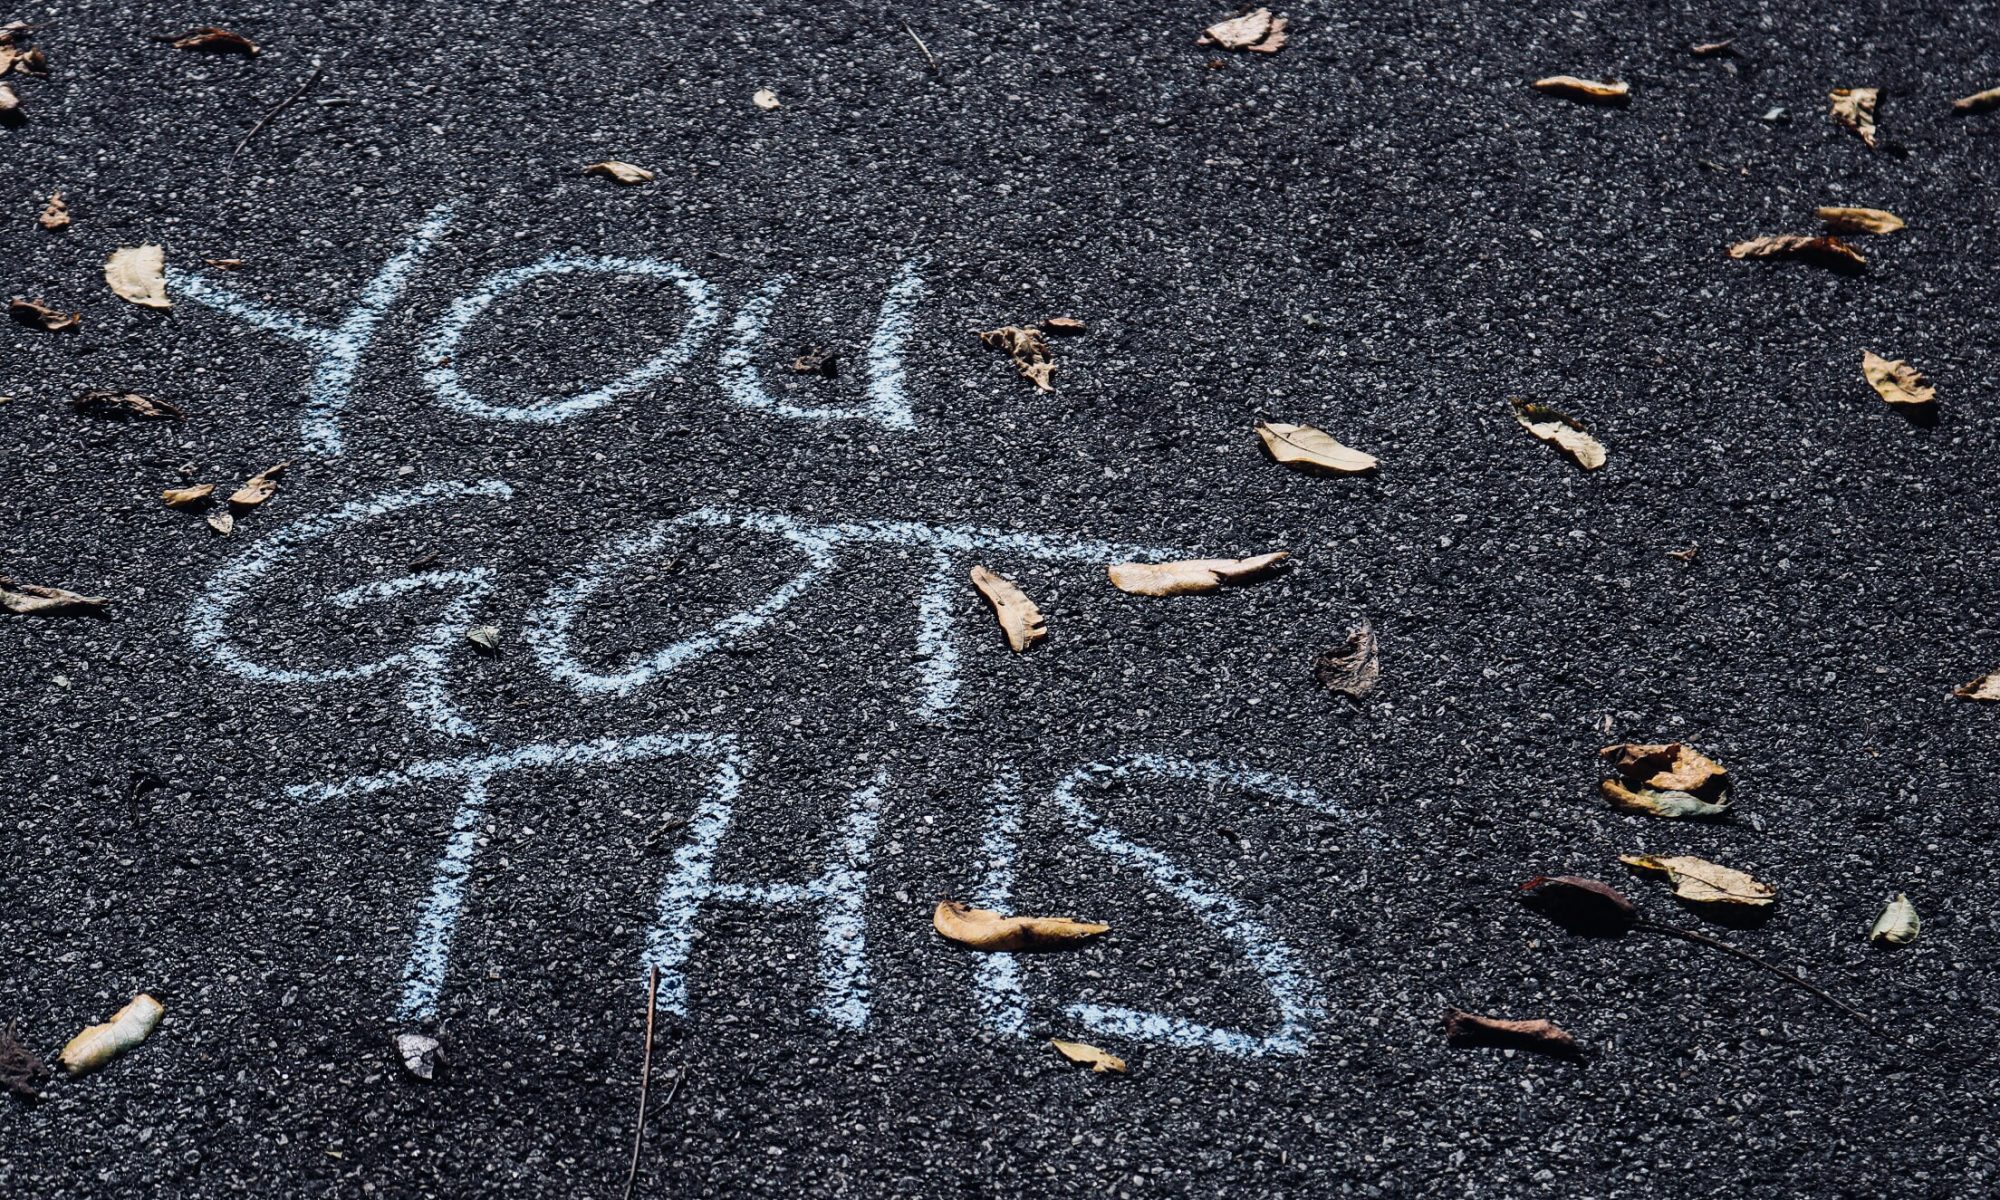 "You Got This" written in chalk on a road